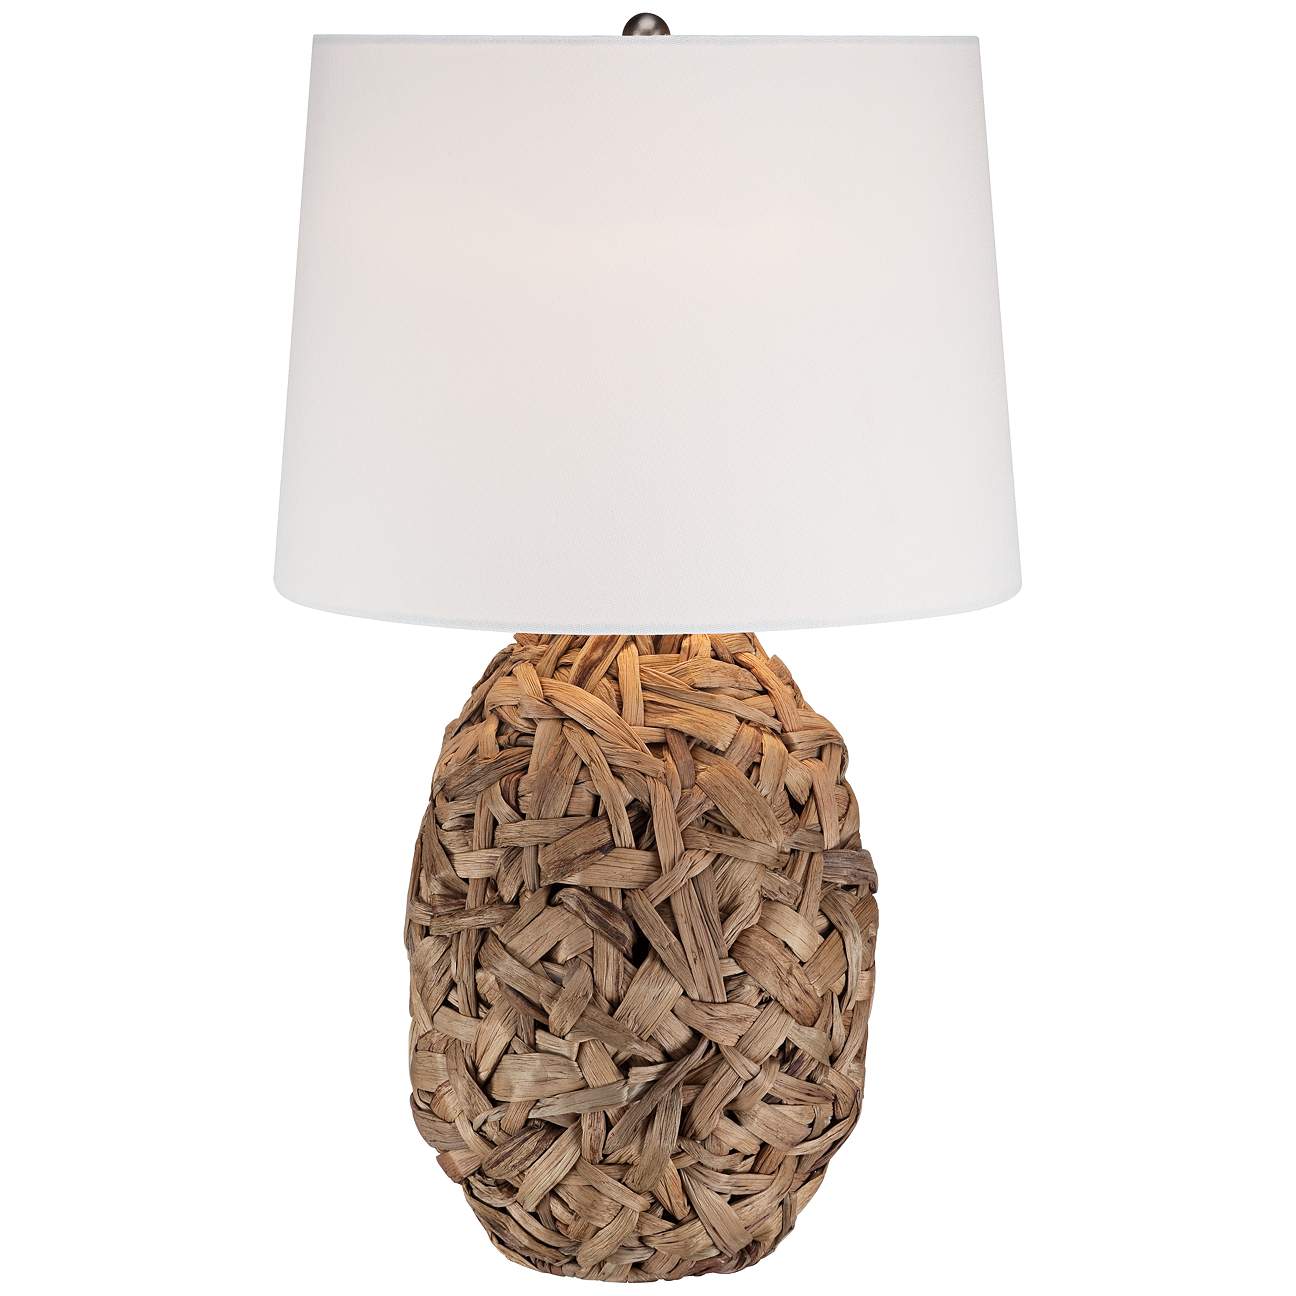 the natural light table lamps